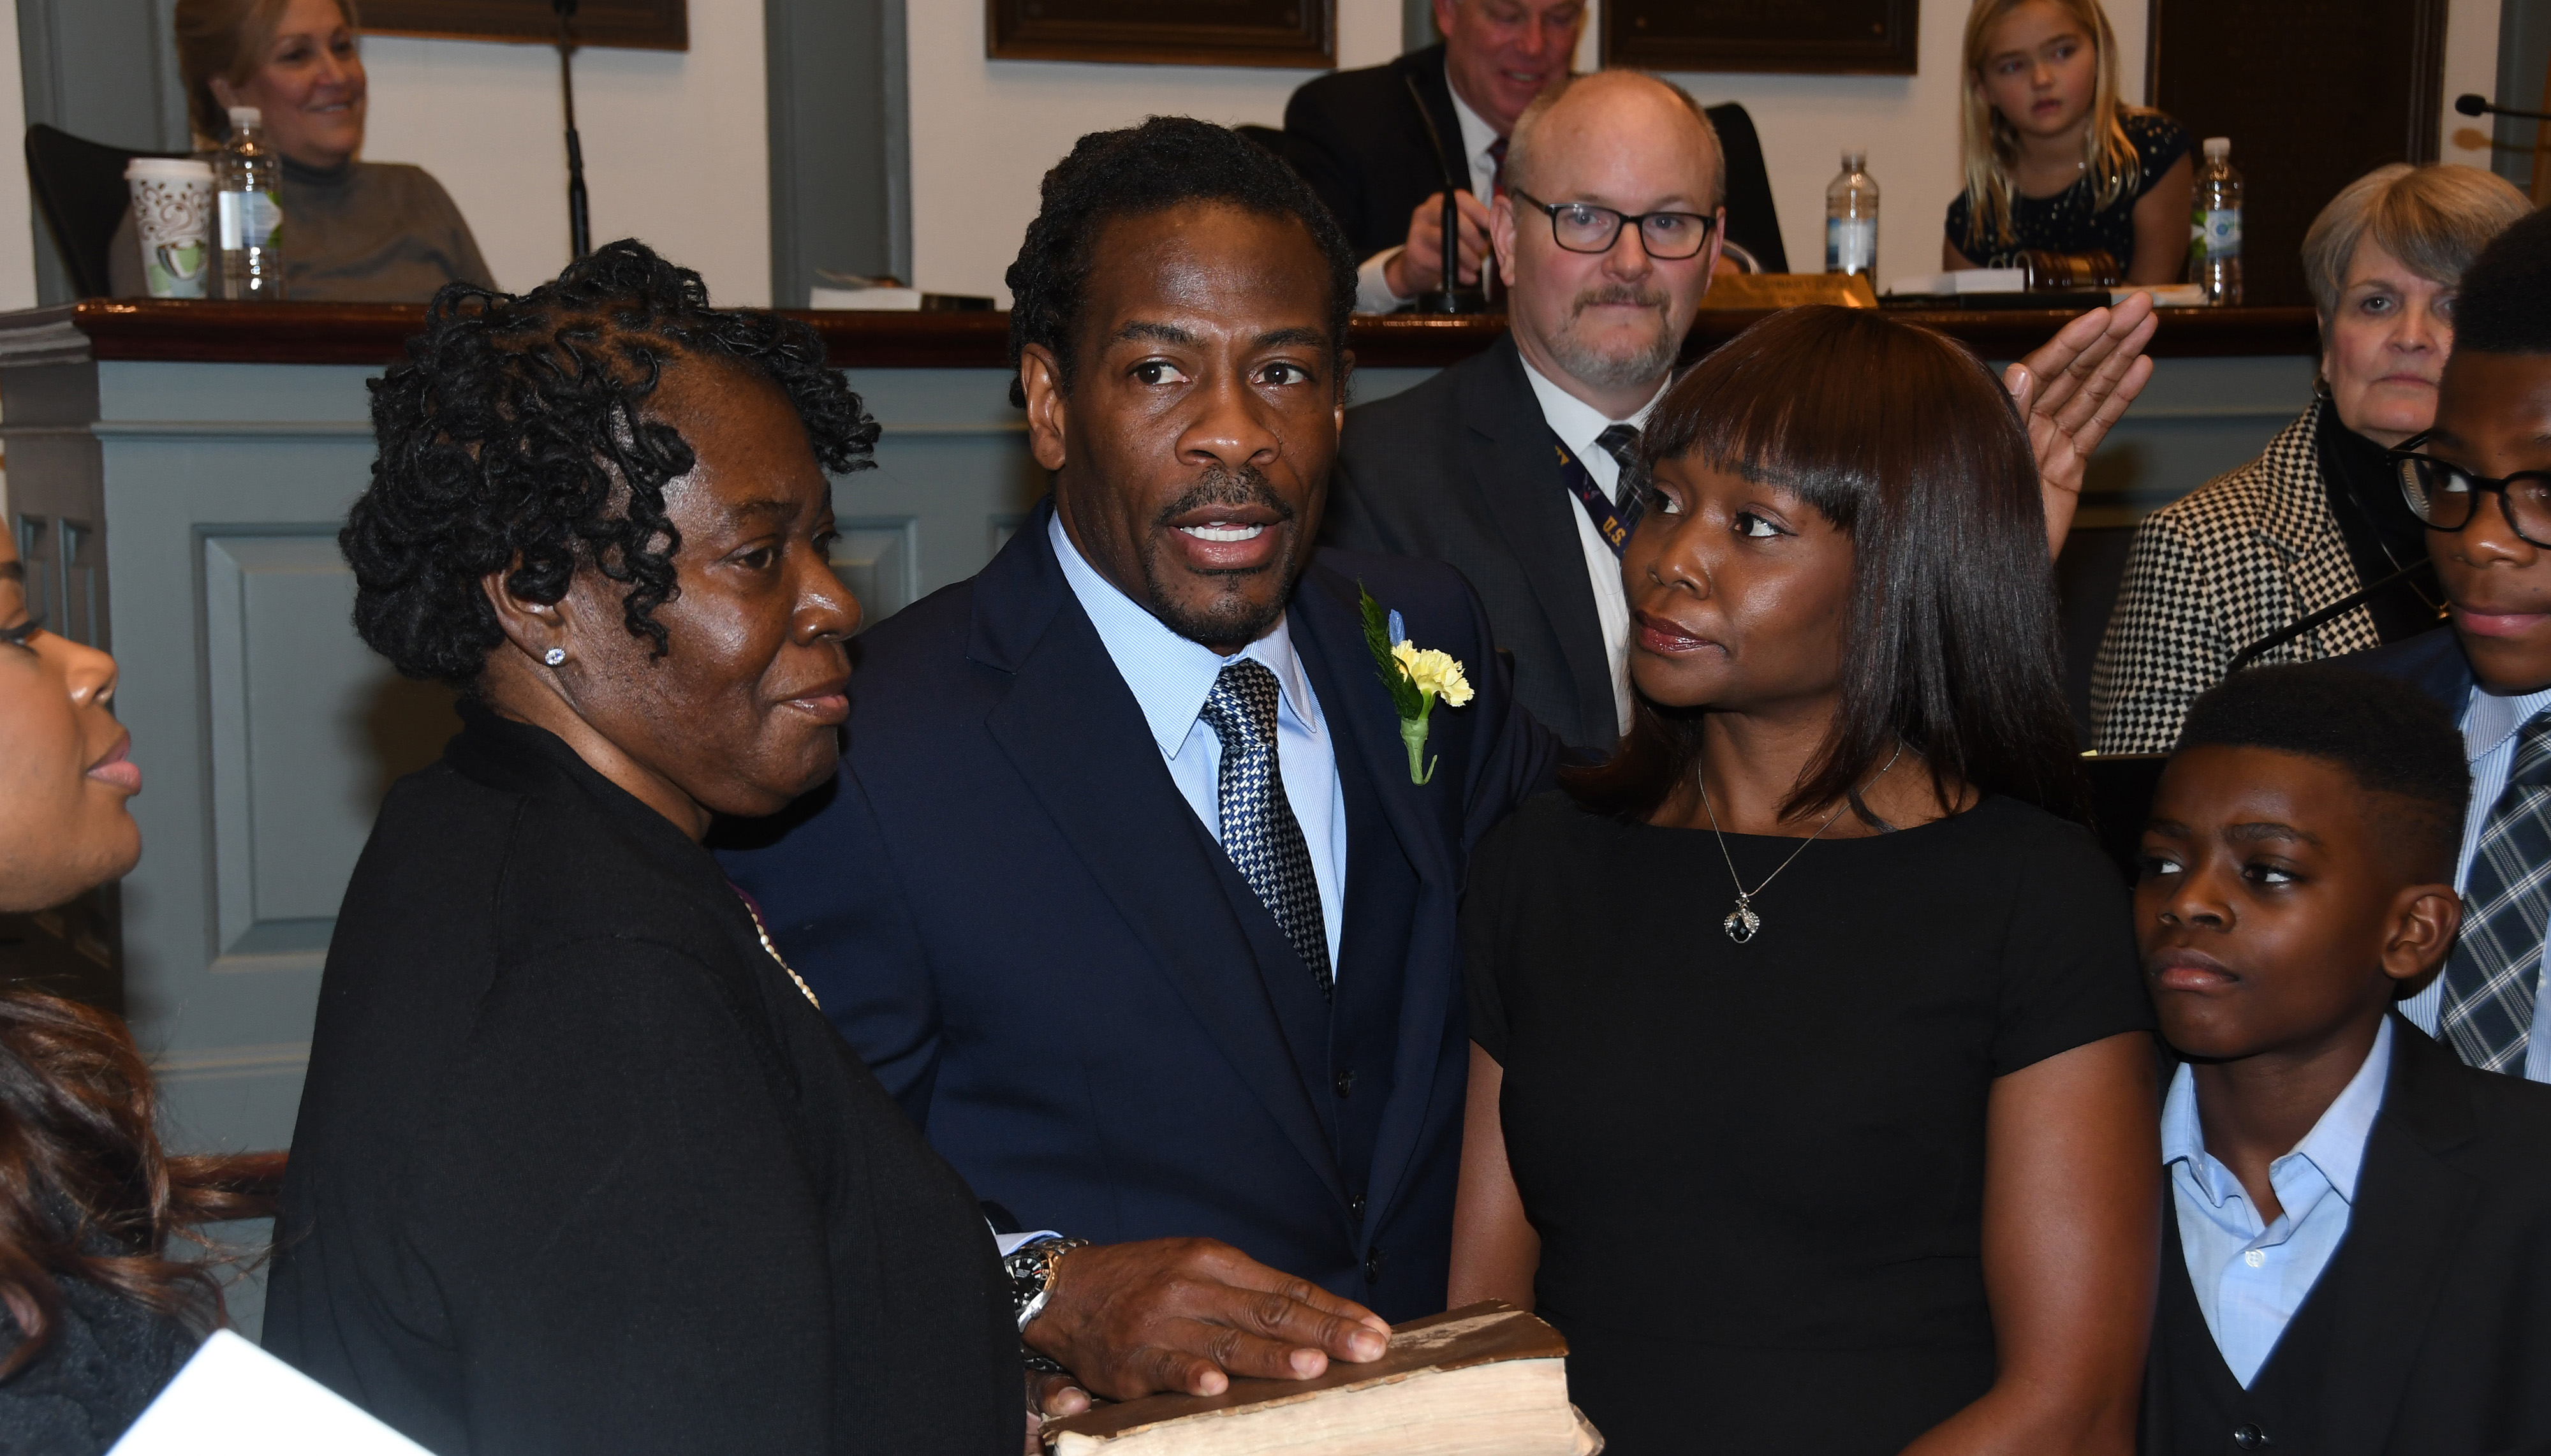 Newly elected Rep. Nnamdi Chukwuocha, surrounded by his family, is sworn in as a member of the Delaware House of Representatives by Delaware Supreme Court Justice James T. Vaughn, Jr. The new legislator's mother Mary Jones (l) holds the bible while his wife Chica stands to his right.